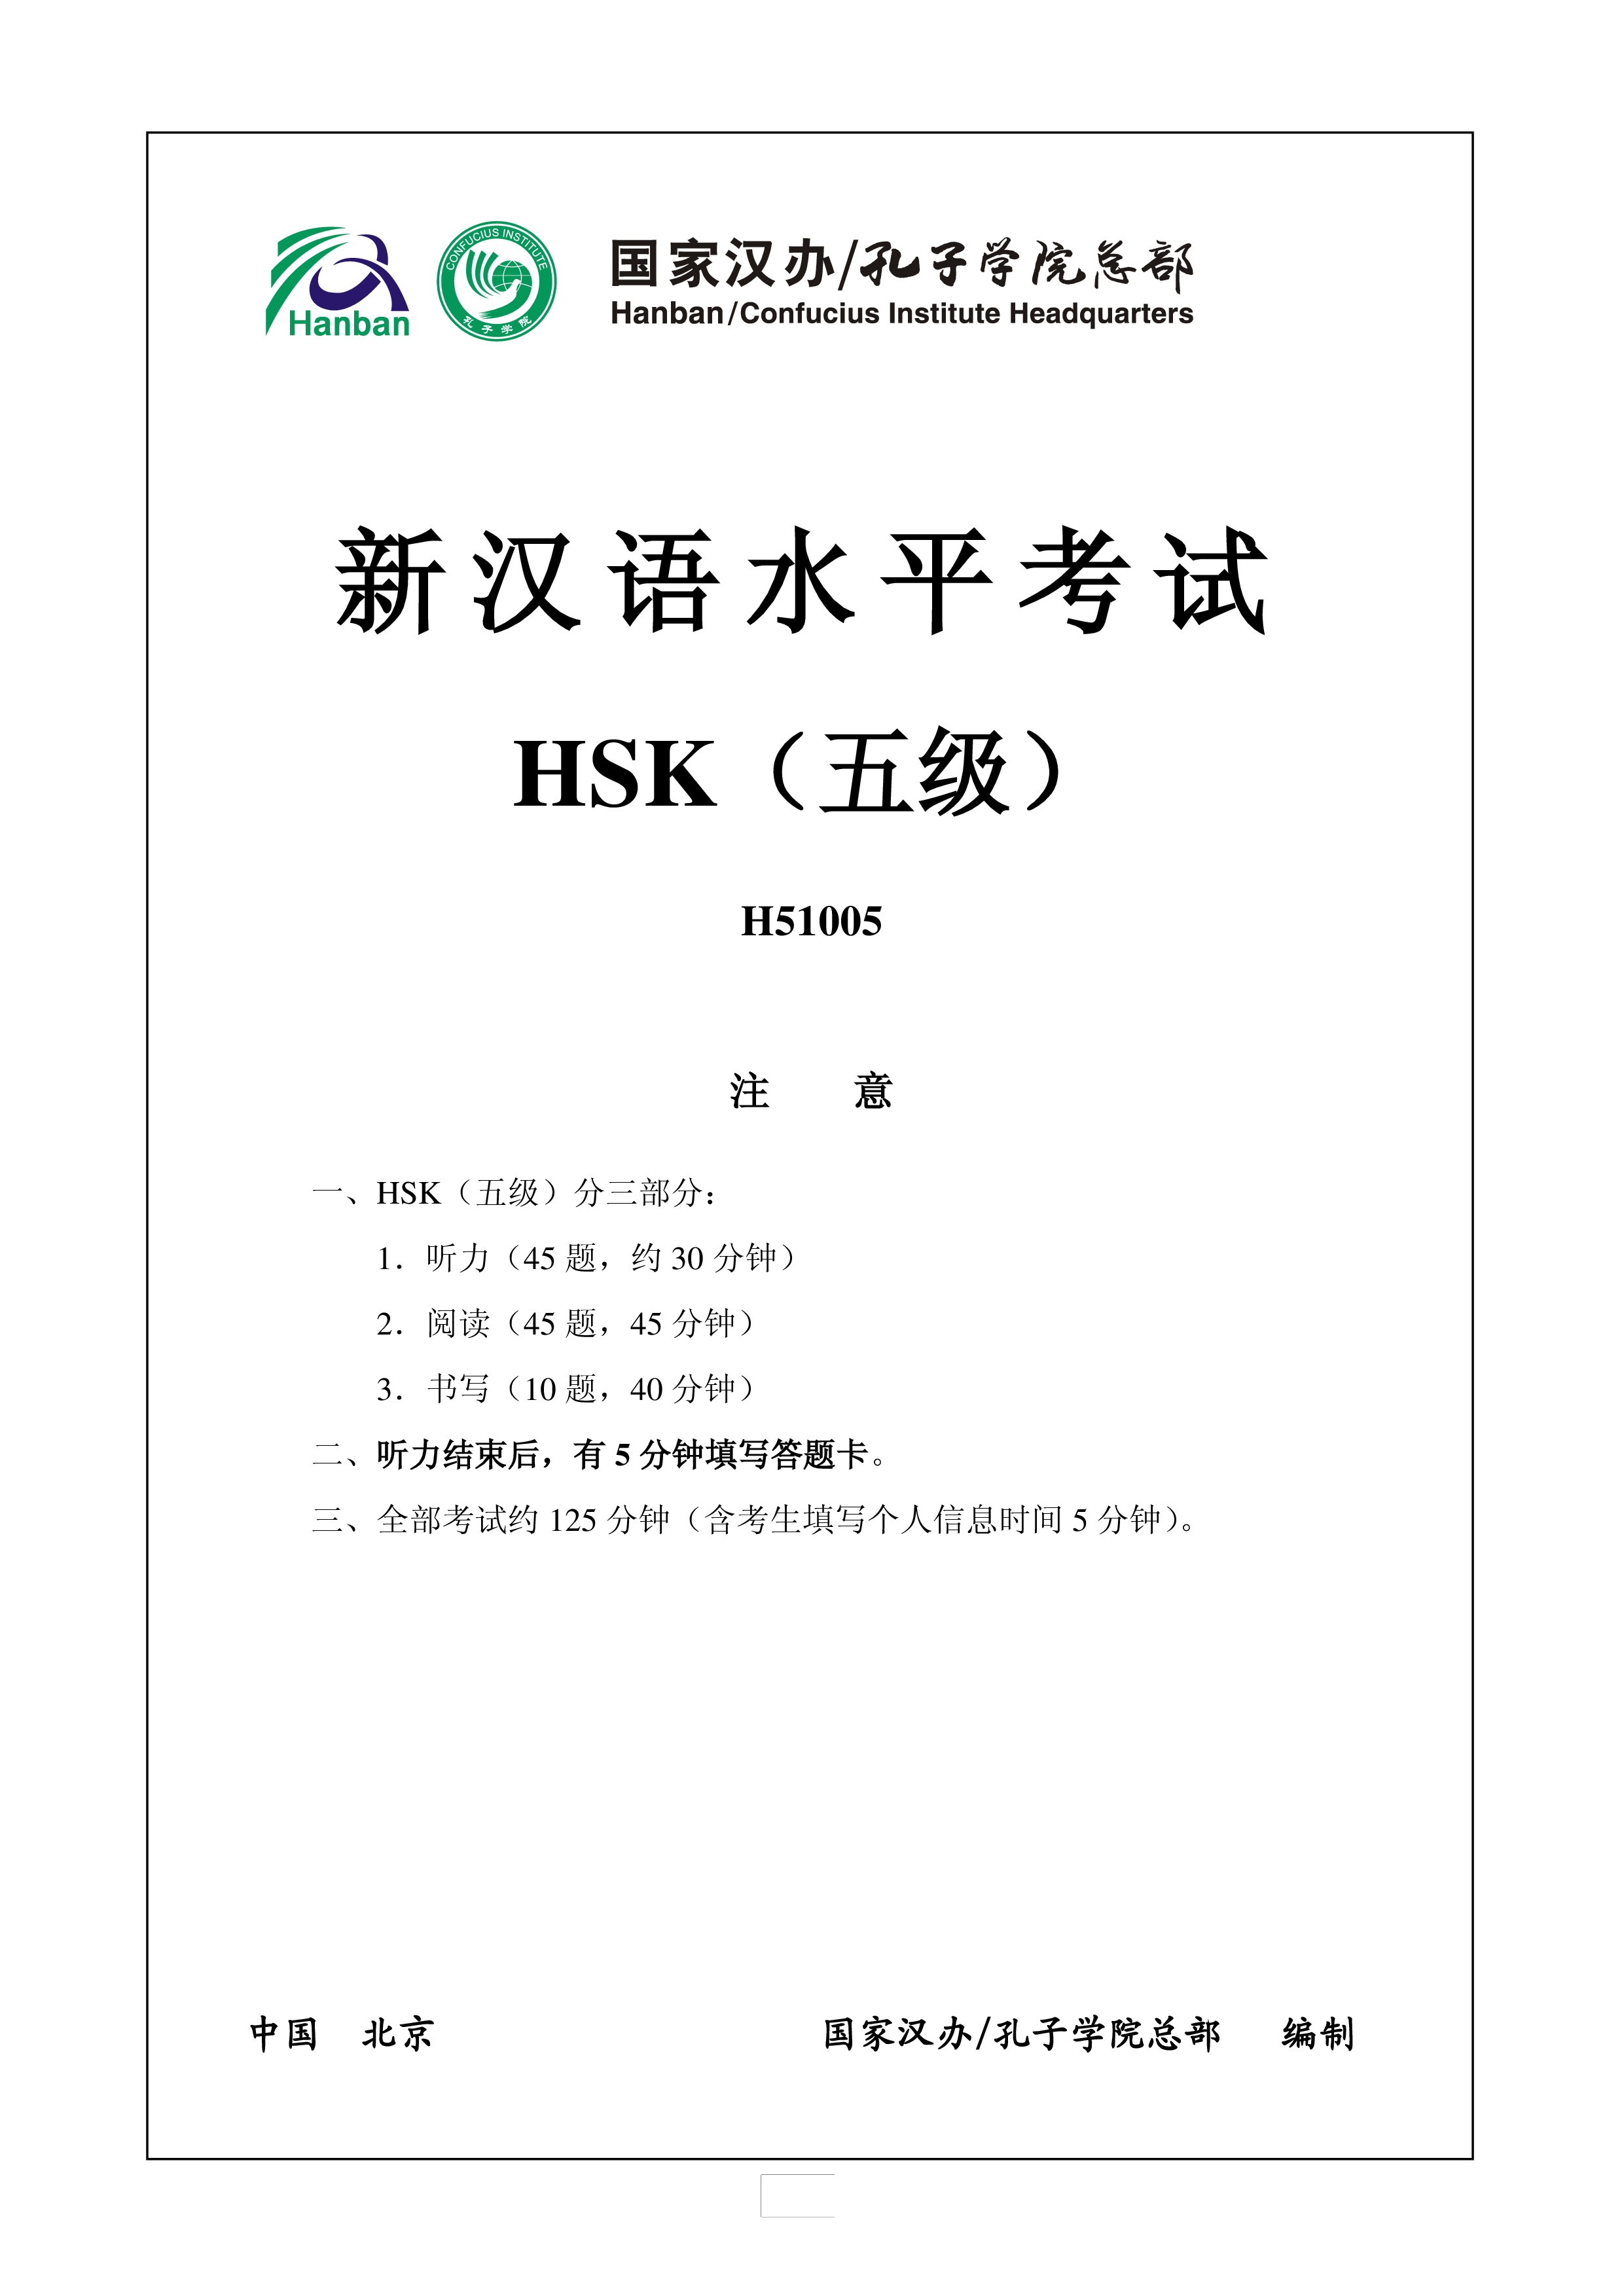 hsk5 h51005 chinese exam incl audio and answers plantilla imagen principal